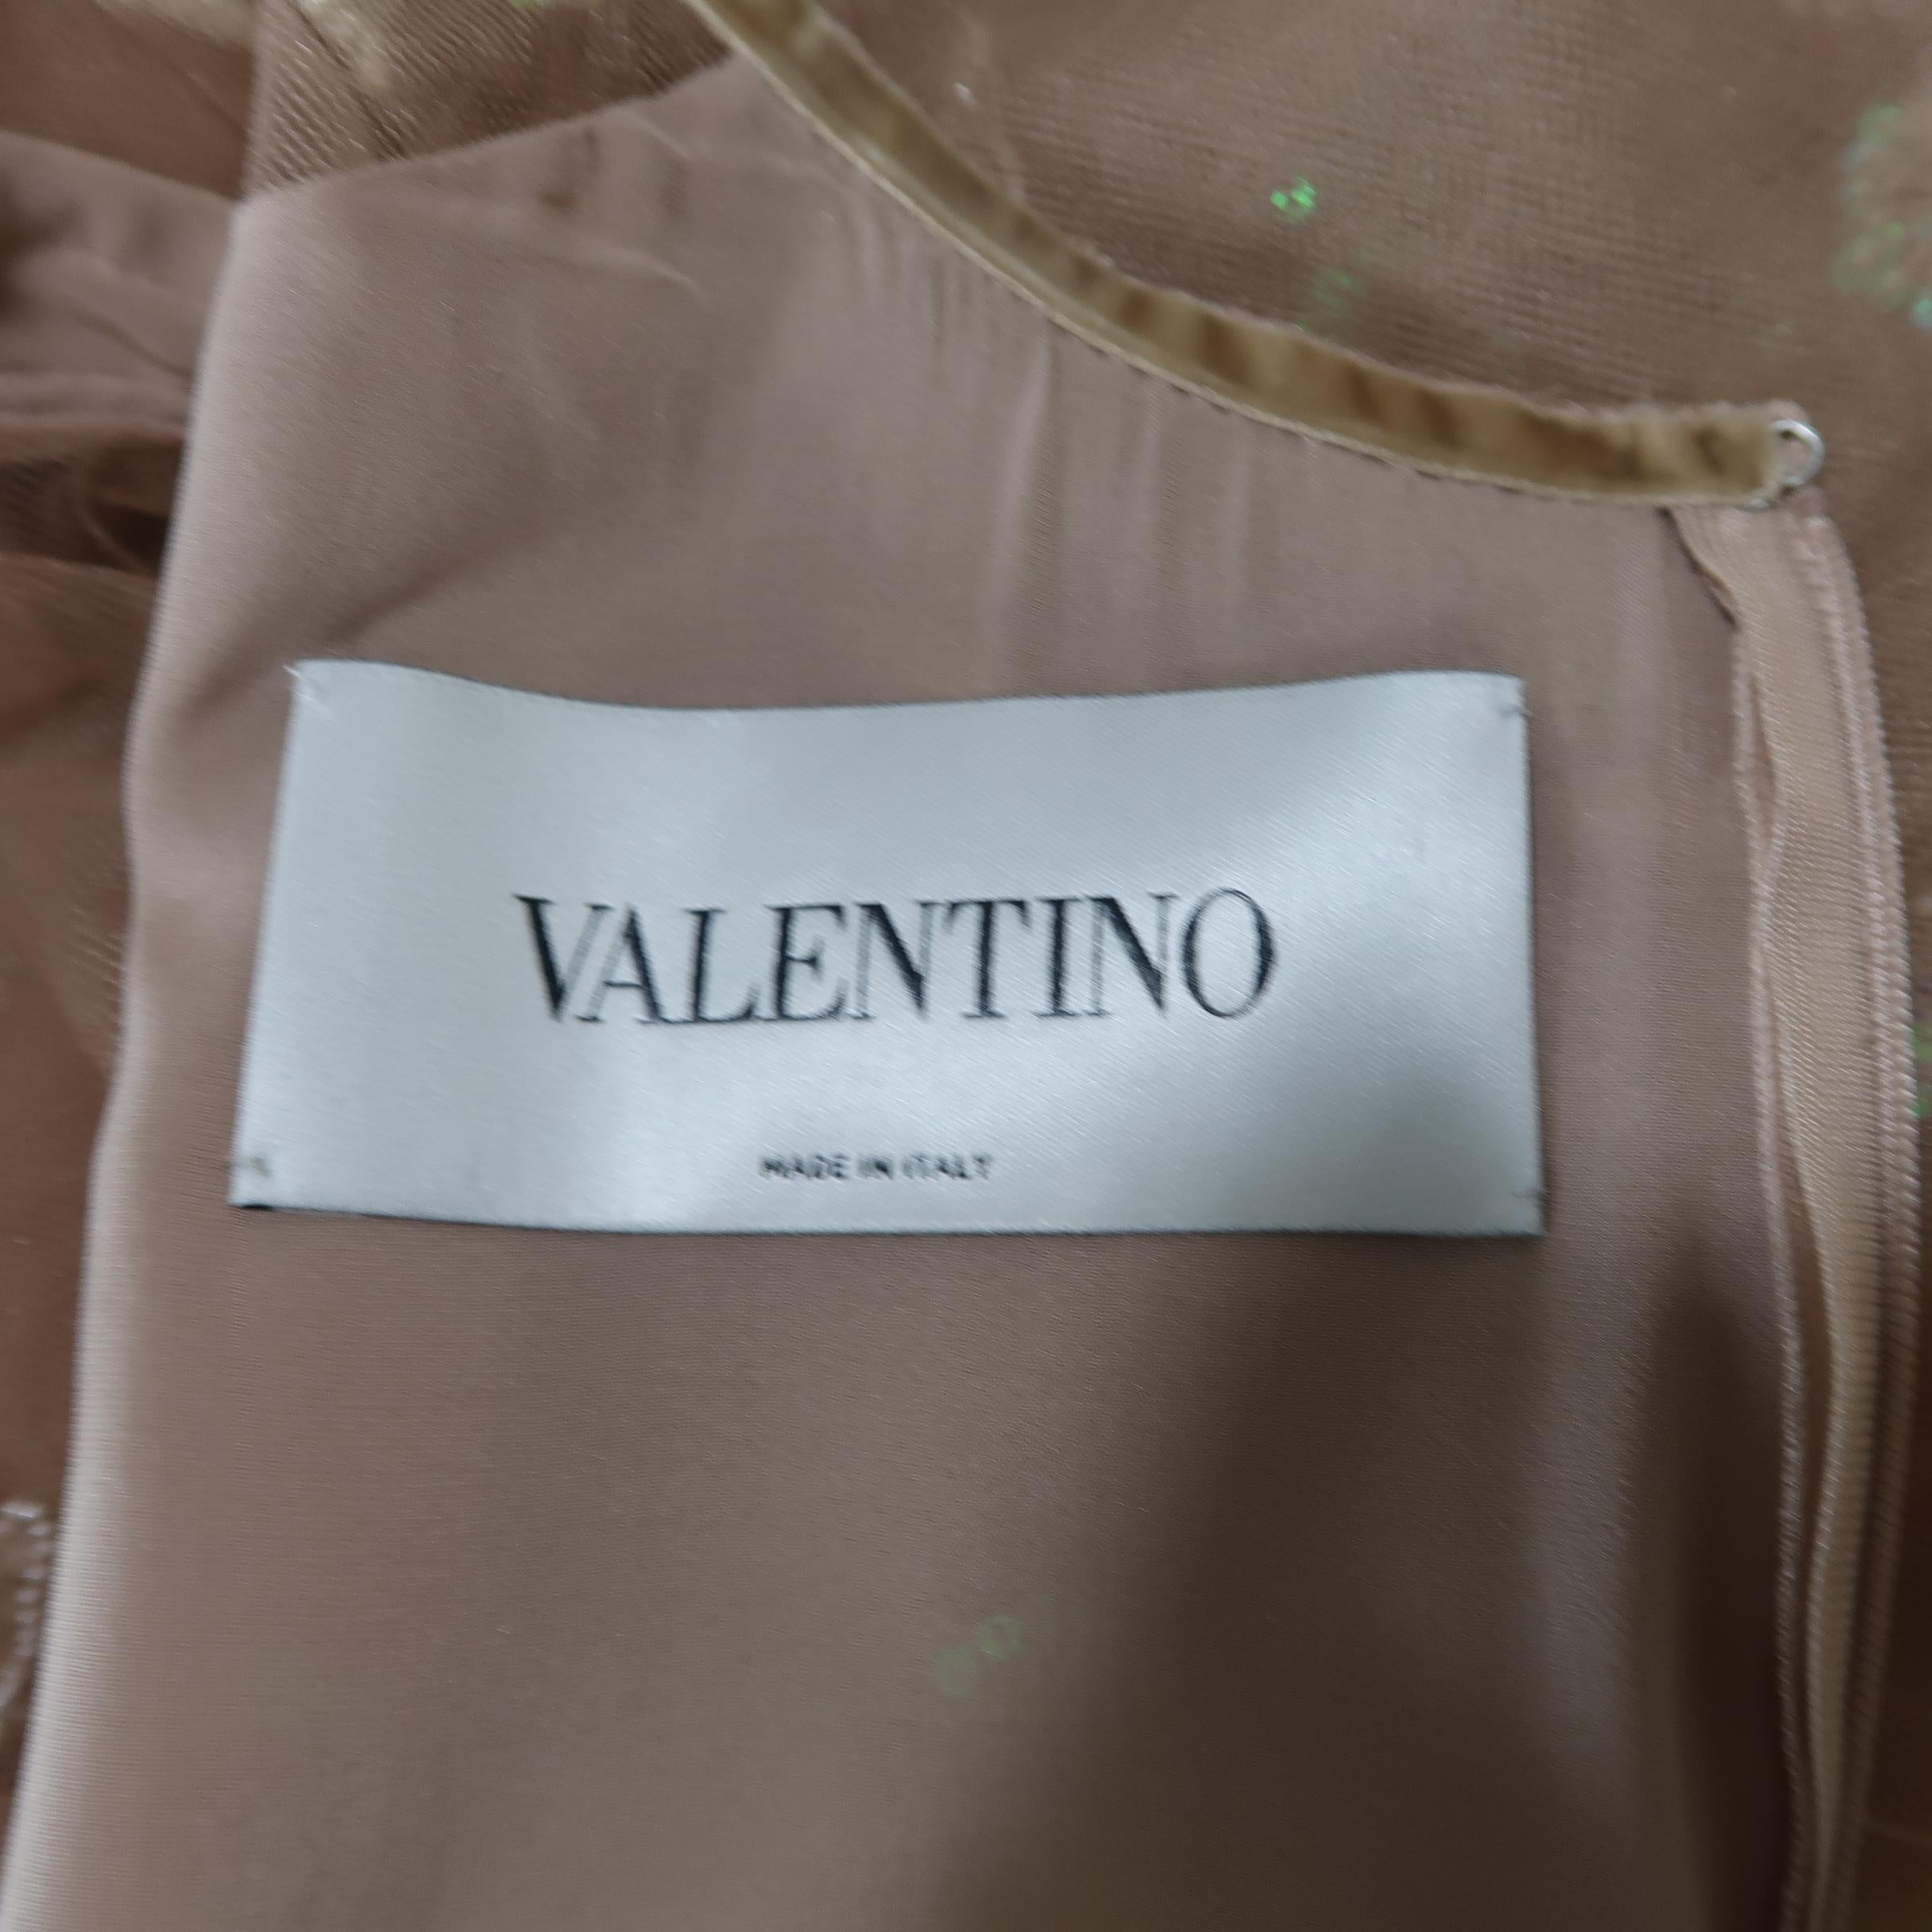 Valentino Dress - Tan Floral Beaded Tulle Scarf Cocktail Dress 1